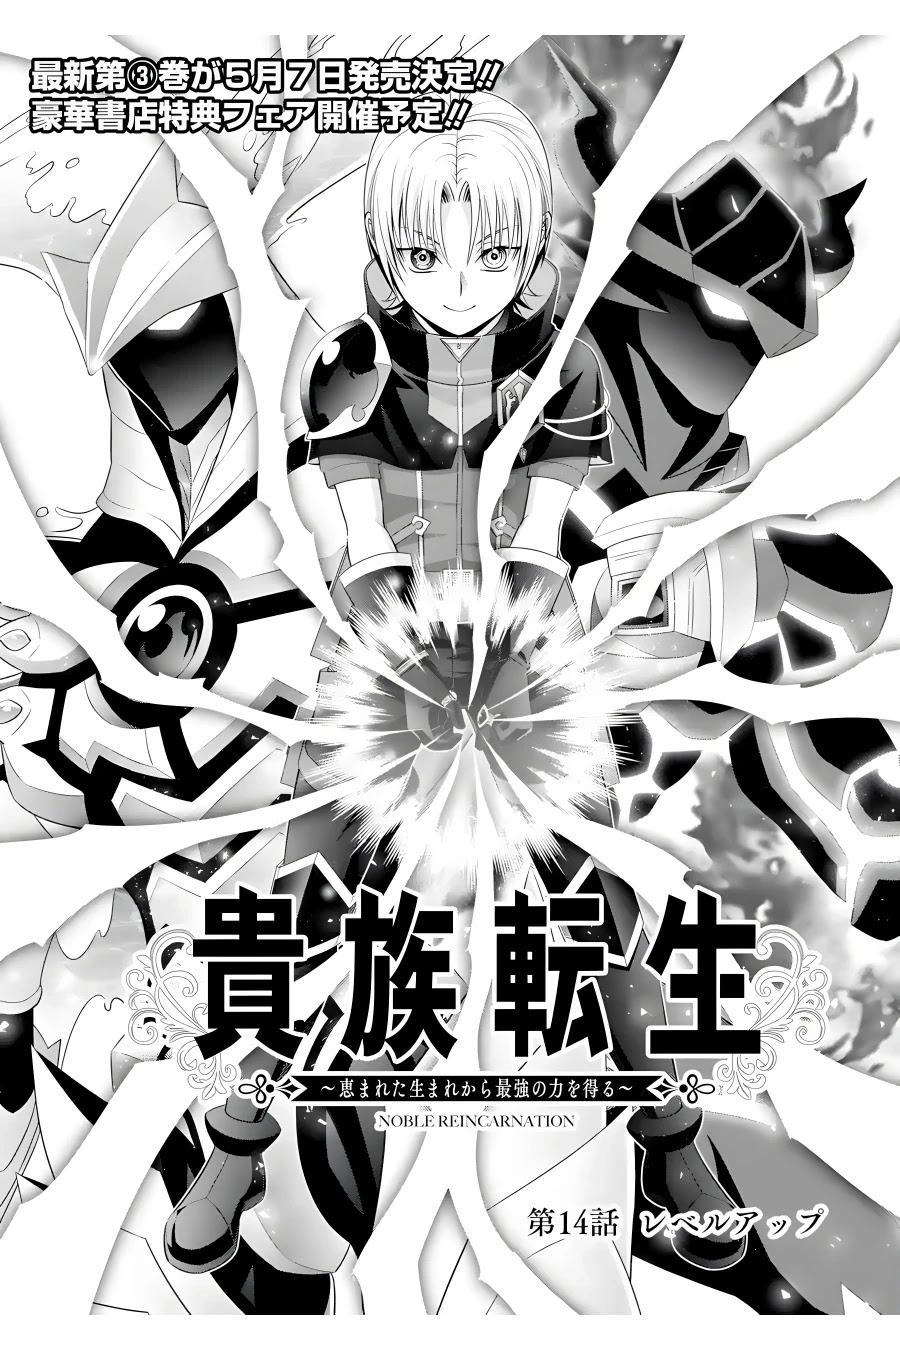 Noble Reincarnation – Blessed With the Strongest Power from Birth manga, read Noble Reincarnation – Blessed With the Strongest Power from Birth, Noble Reincarnation – Blessed With the Strongest Power from Birth anime, read Noble Reincarnation – Blessed With the Strongest Power from Birth manga